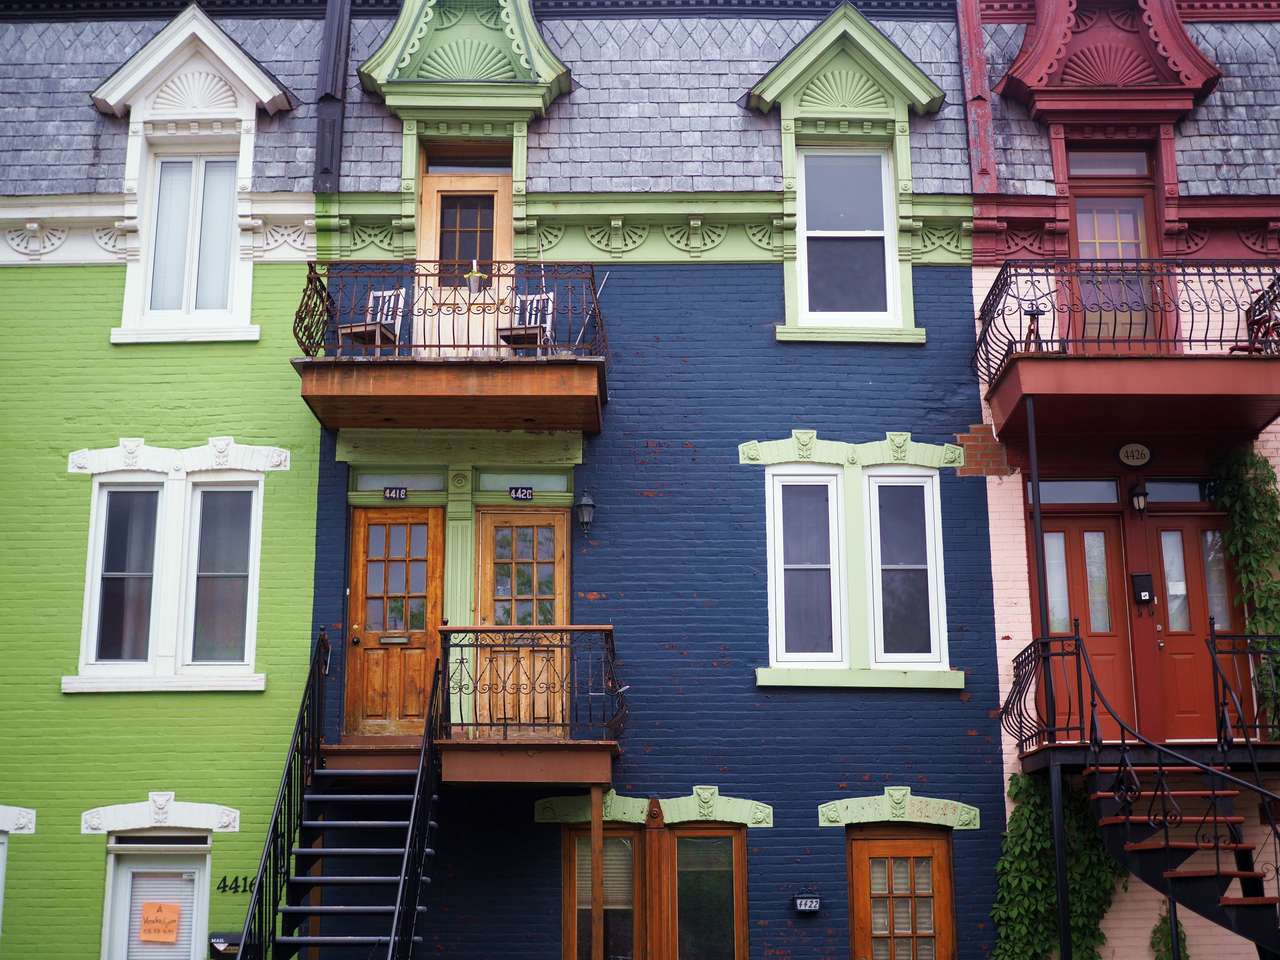 Colored houses in Montreal jigsaw puzzle online